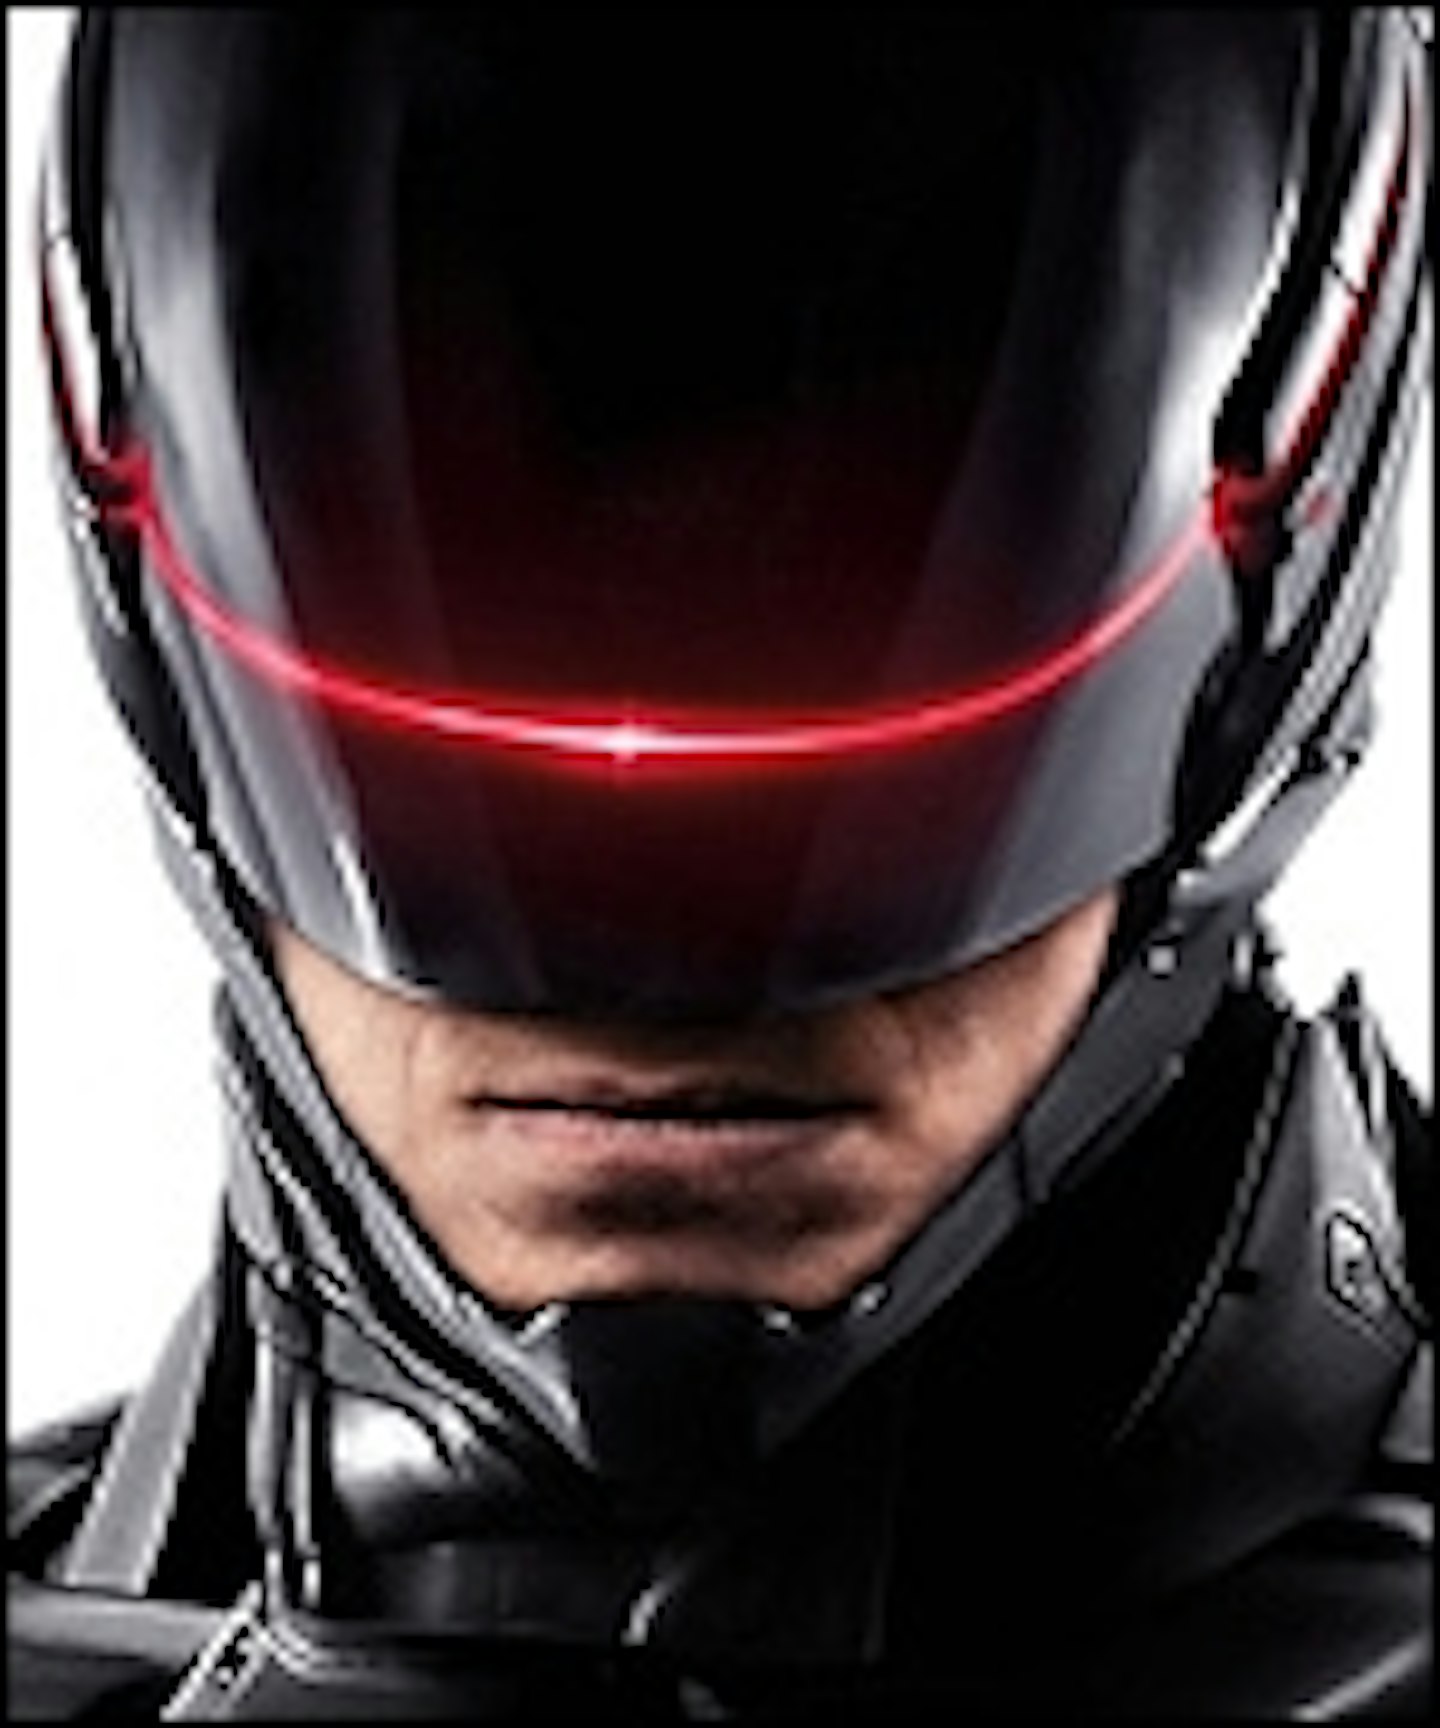 OmniCorp Introduces RoboCop In New Viral Video